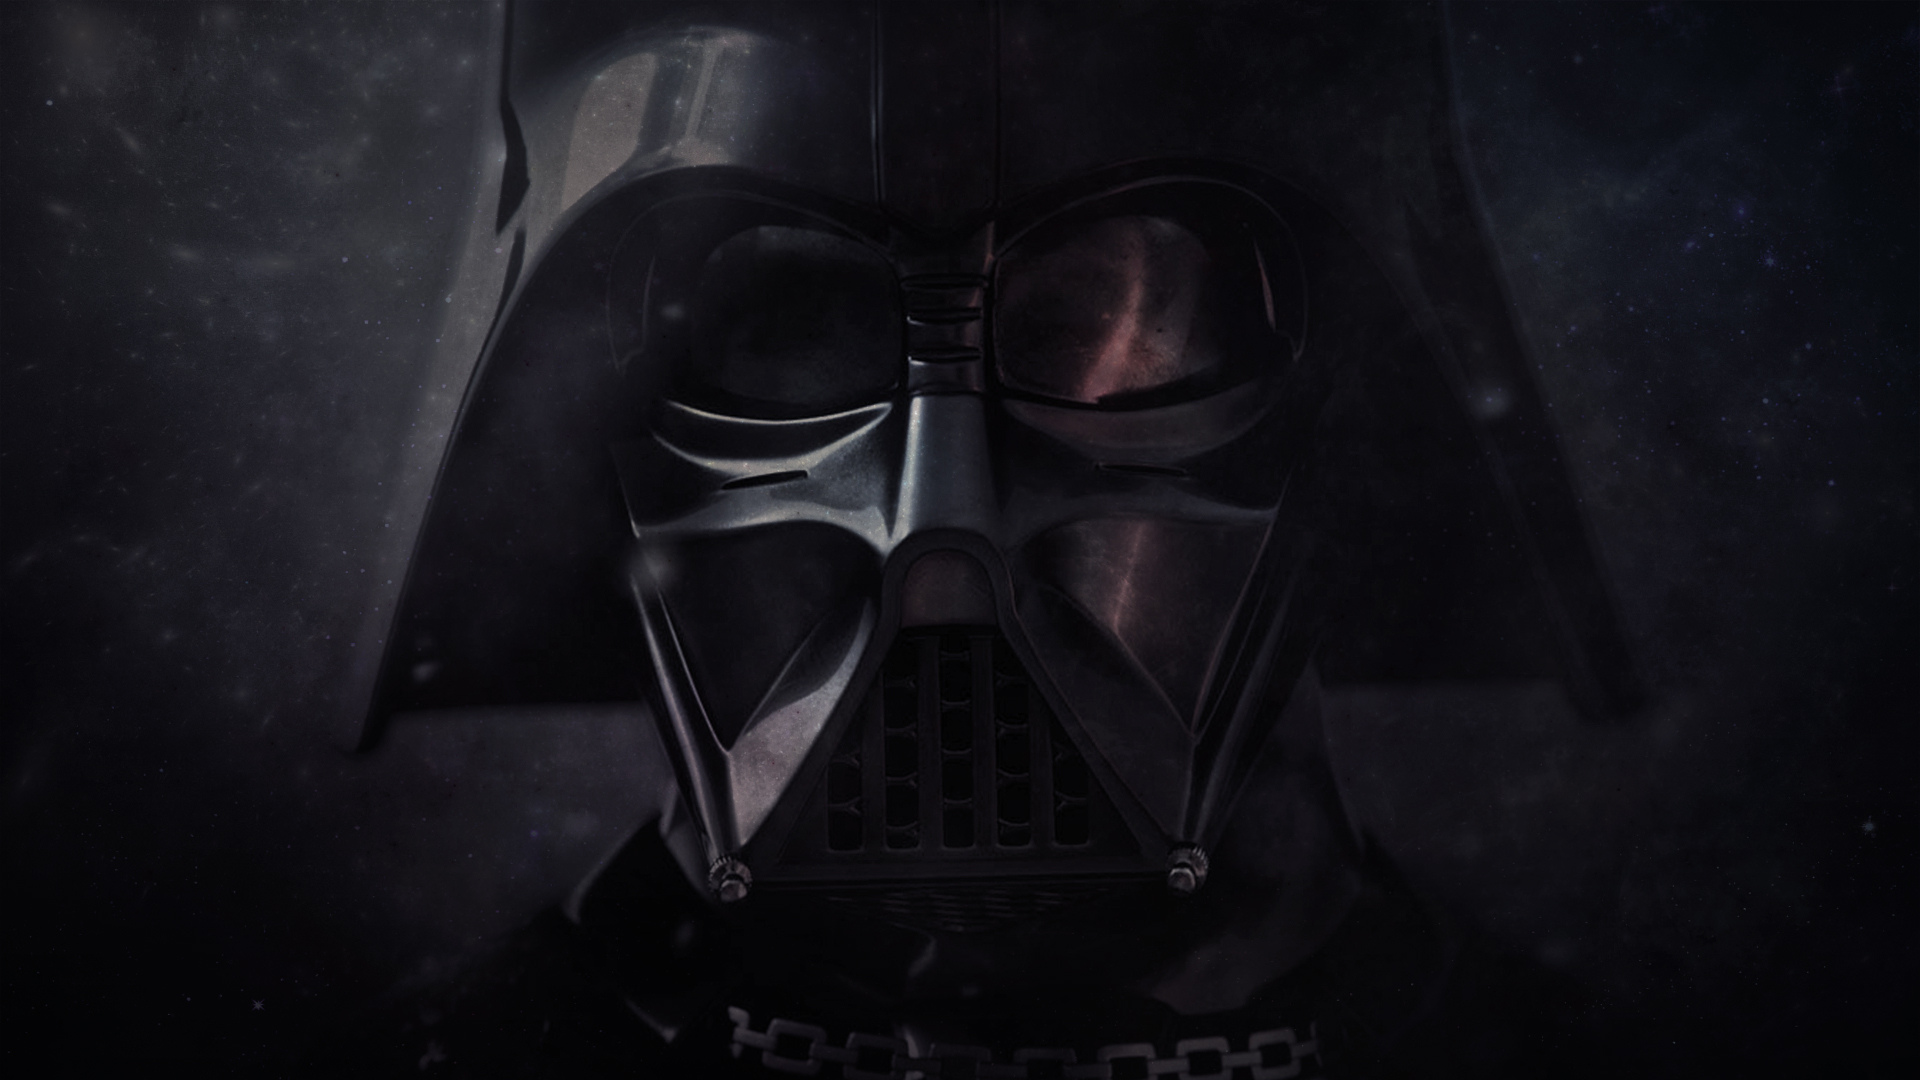 Wallpaper 1080p Darth Vader By Iamsointense On